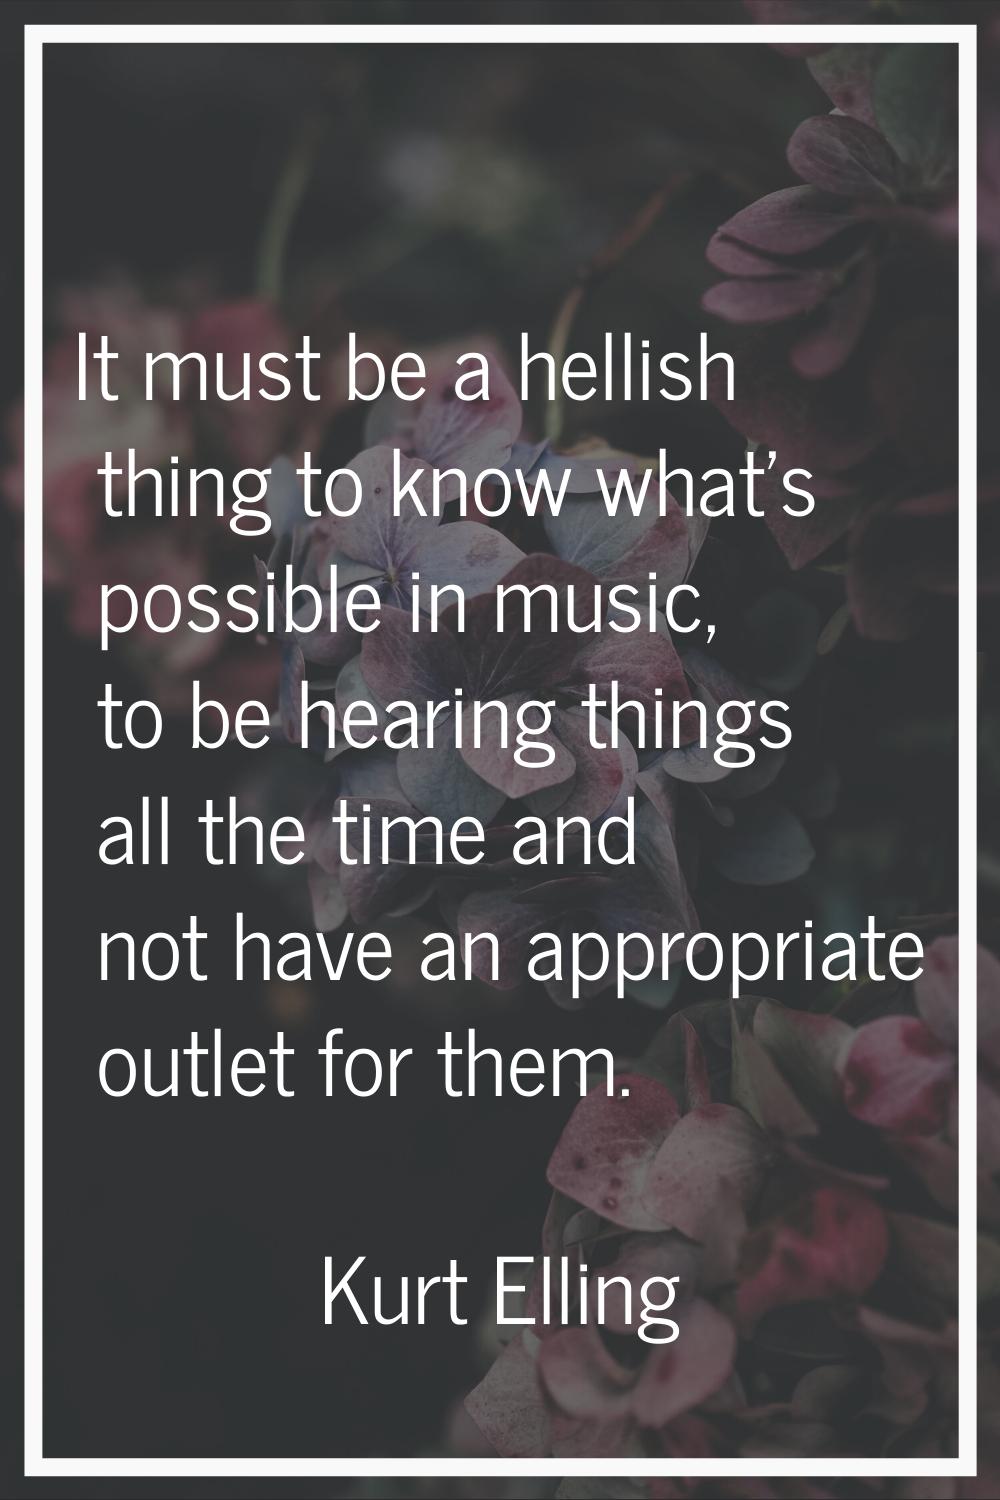 It must be a hellish thing to know what's possible in music, to be hearing things all the time and 